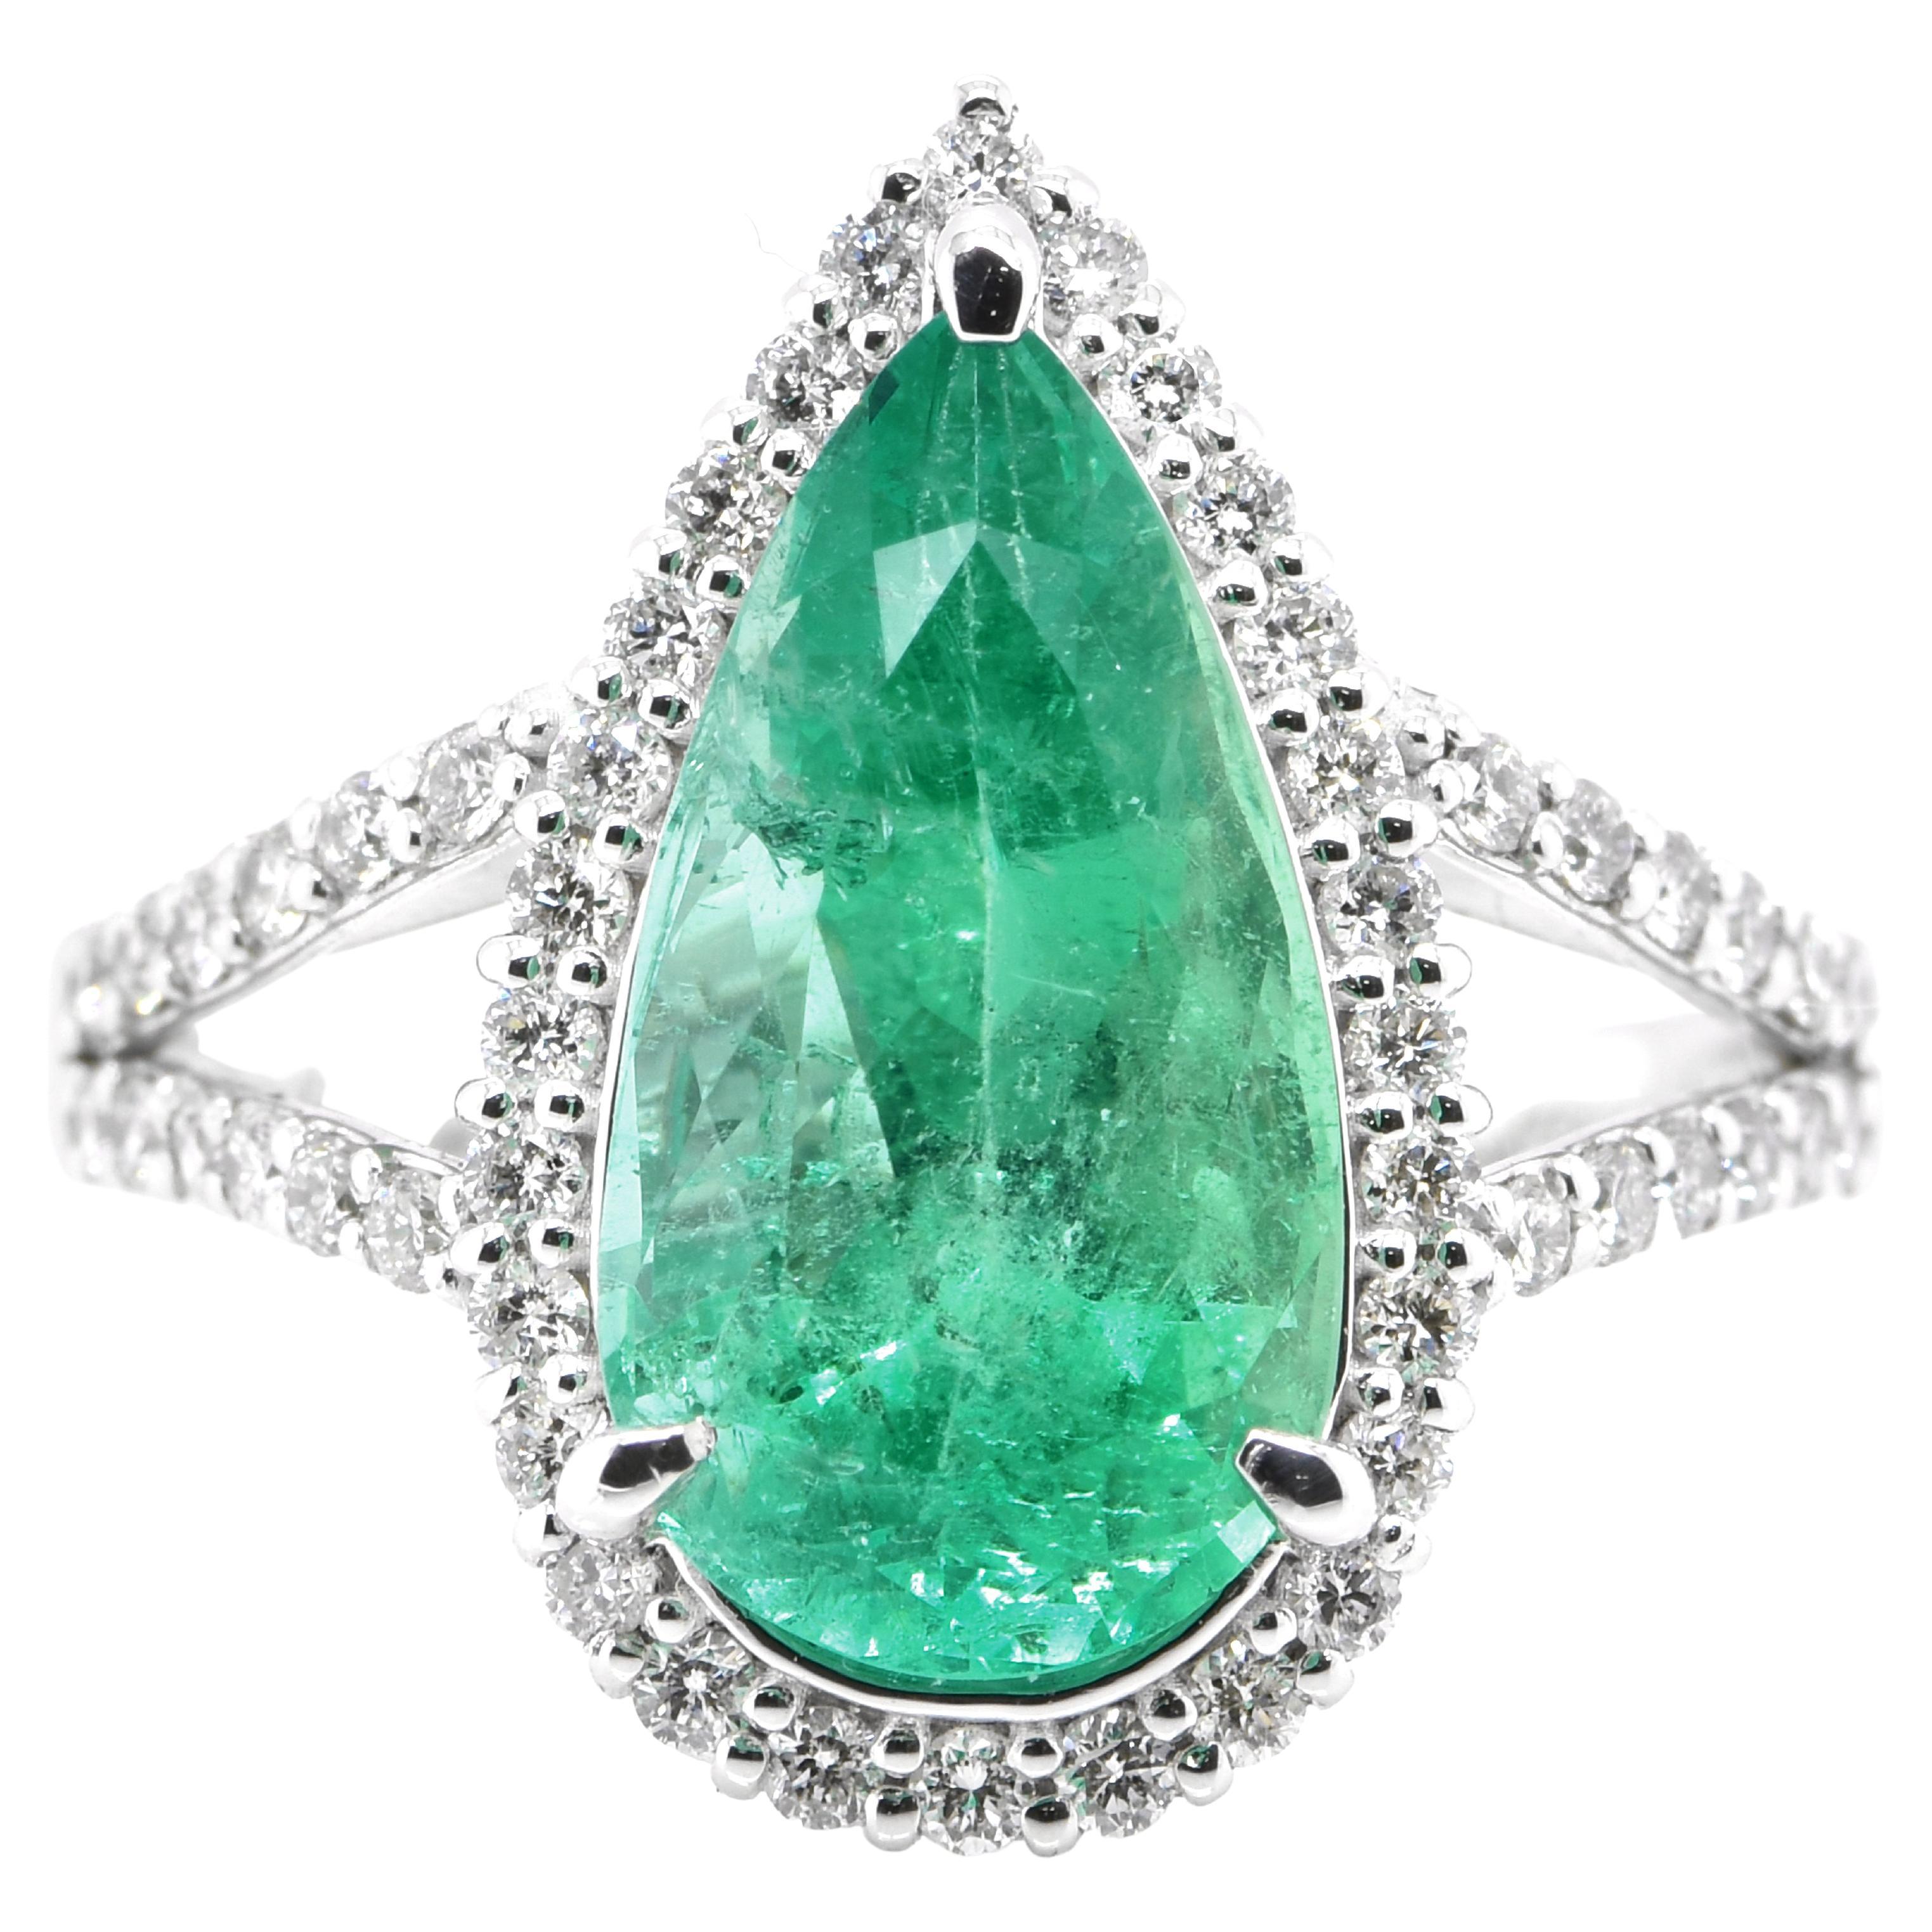 3.76 Carat Natural Pear Shape Emerald and Diamond Ring Set in Platinum